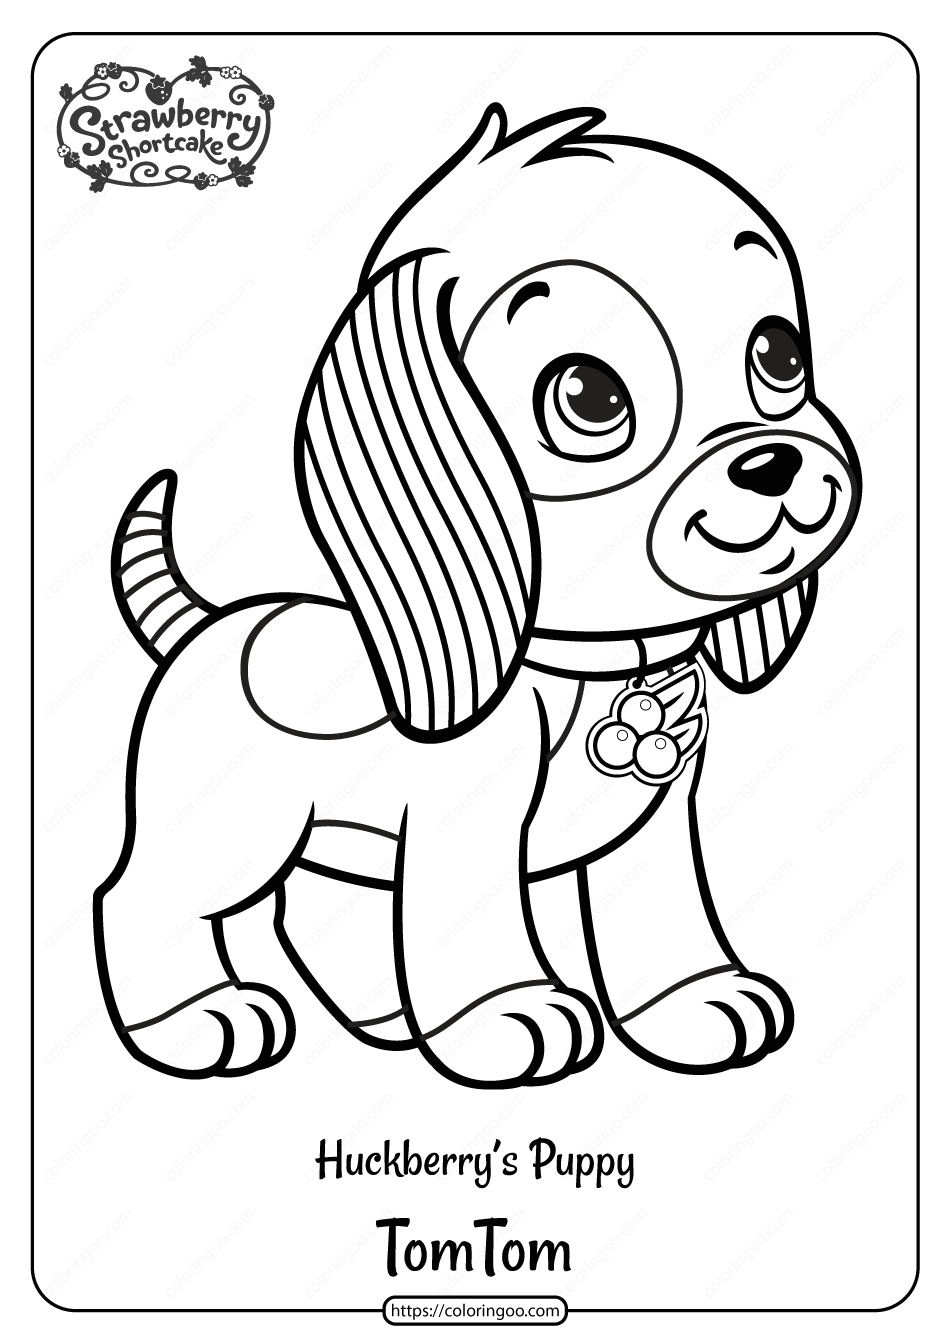 Printable Huckleberry's Puppy Tom Tom Coloring Page